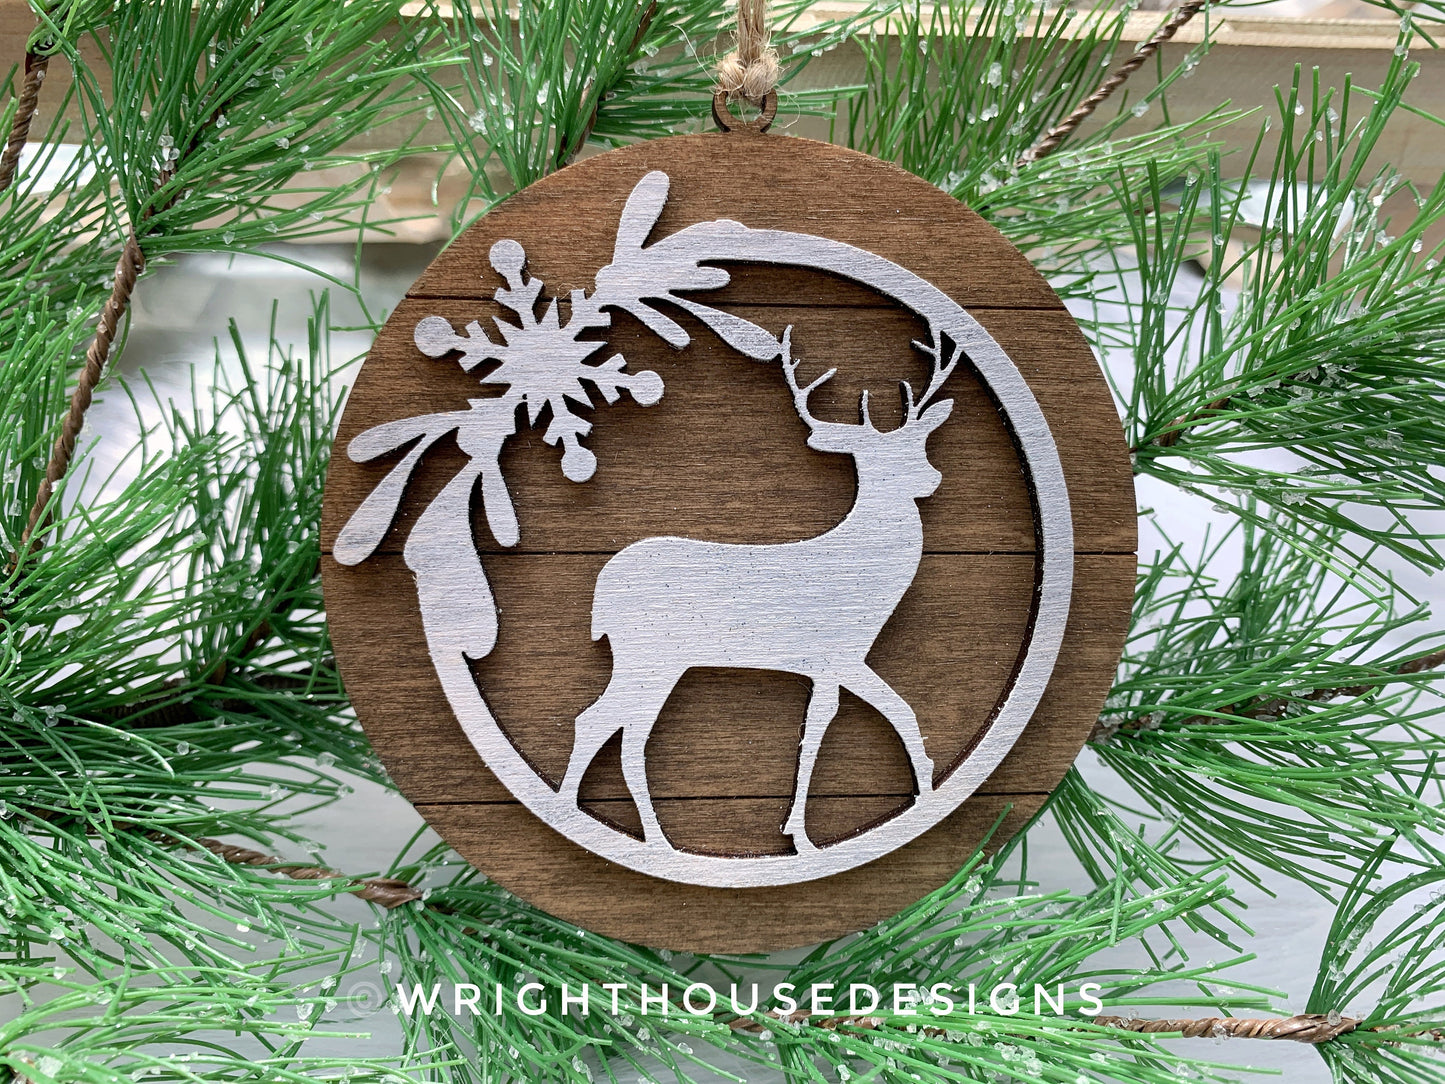 Rustic Winter Woodland Christmas Farmhouse Ornaments - Snow, Pine Tree, Reindeer - Winter Ski Lodge Style Rounds - Holiday Tiered Tray Decor